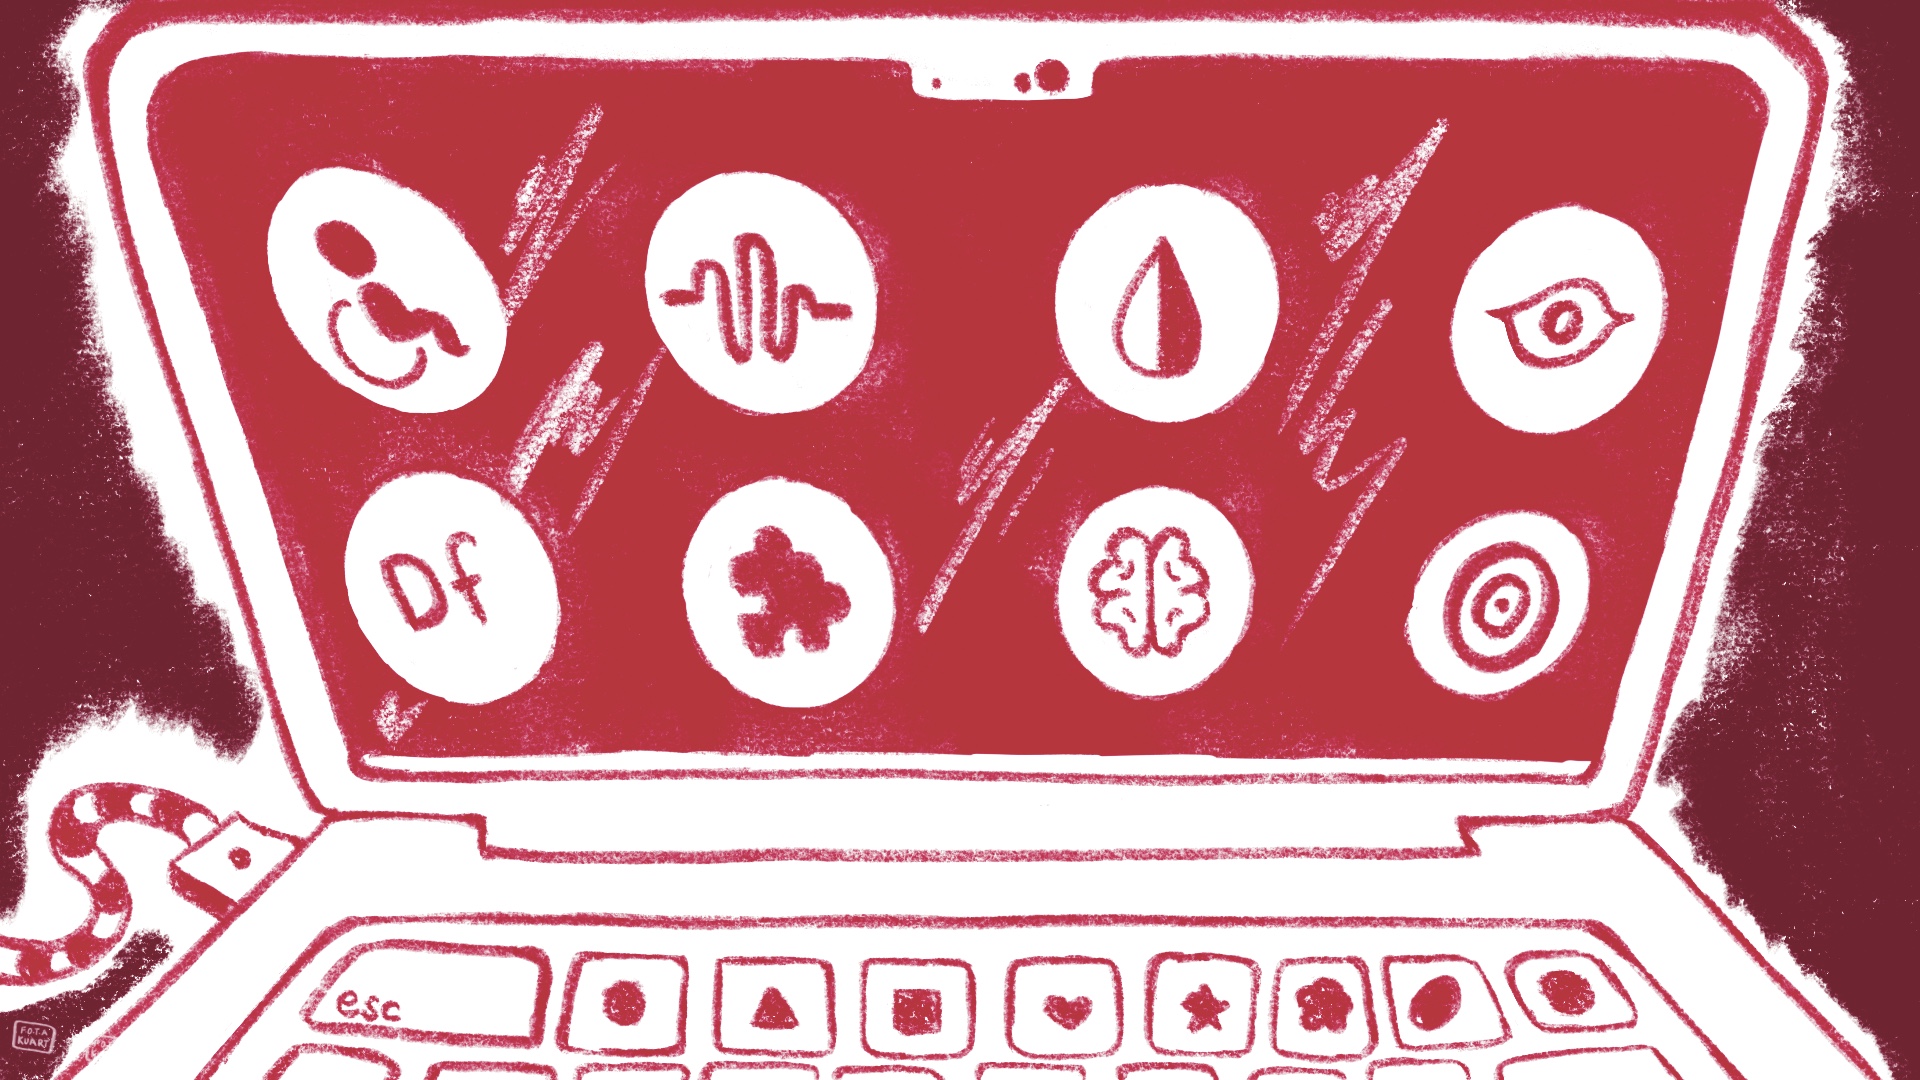 Red and white illustration of an open laptop with symbols representing various disabilities.